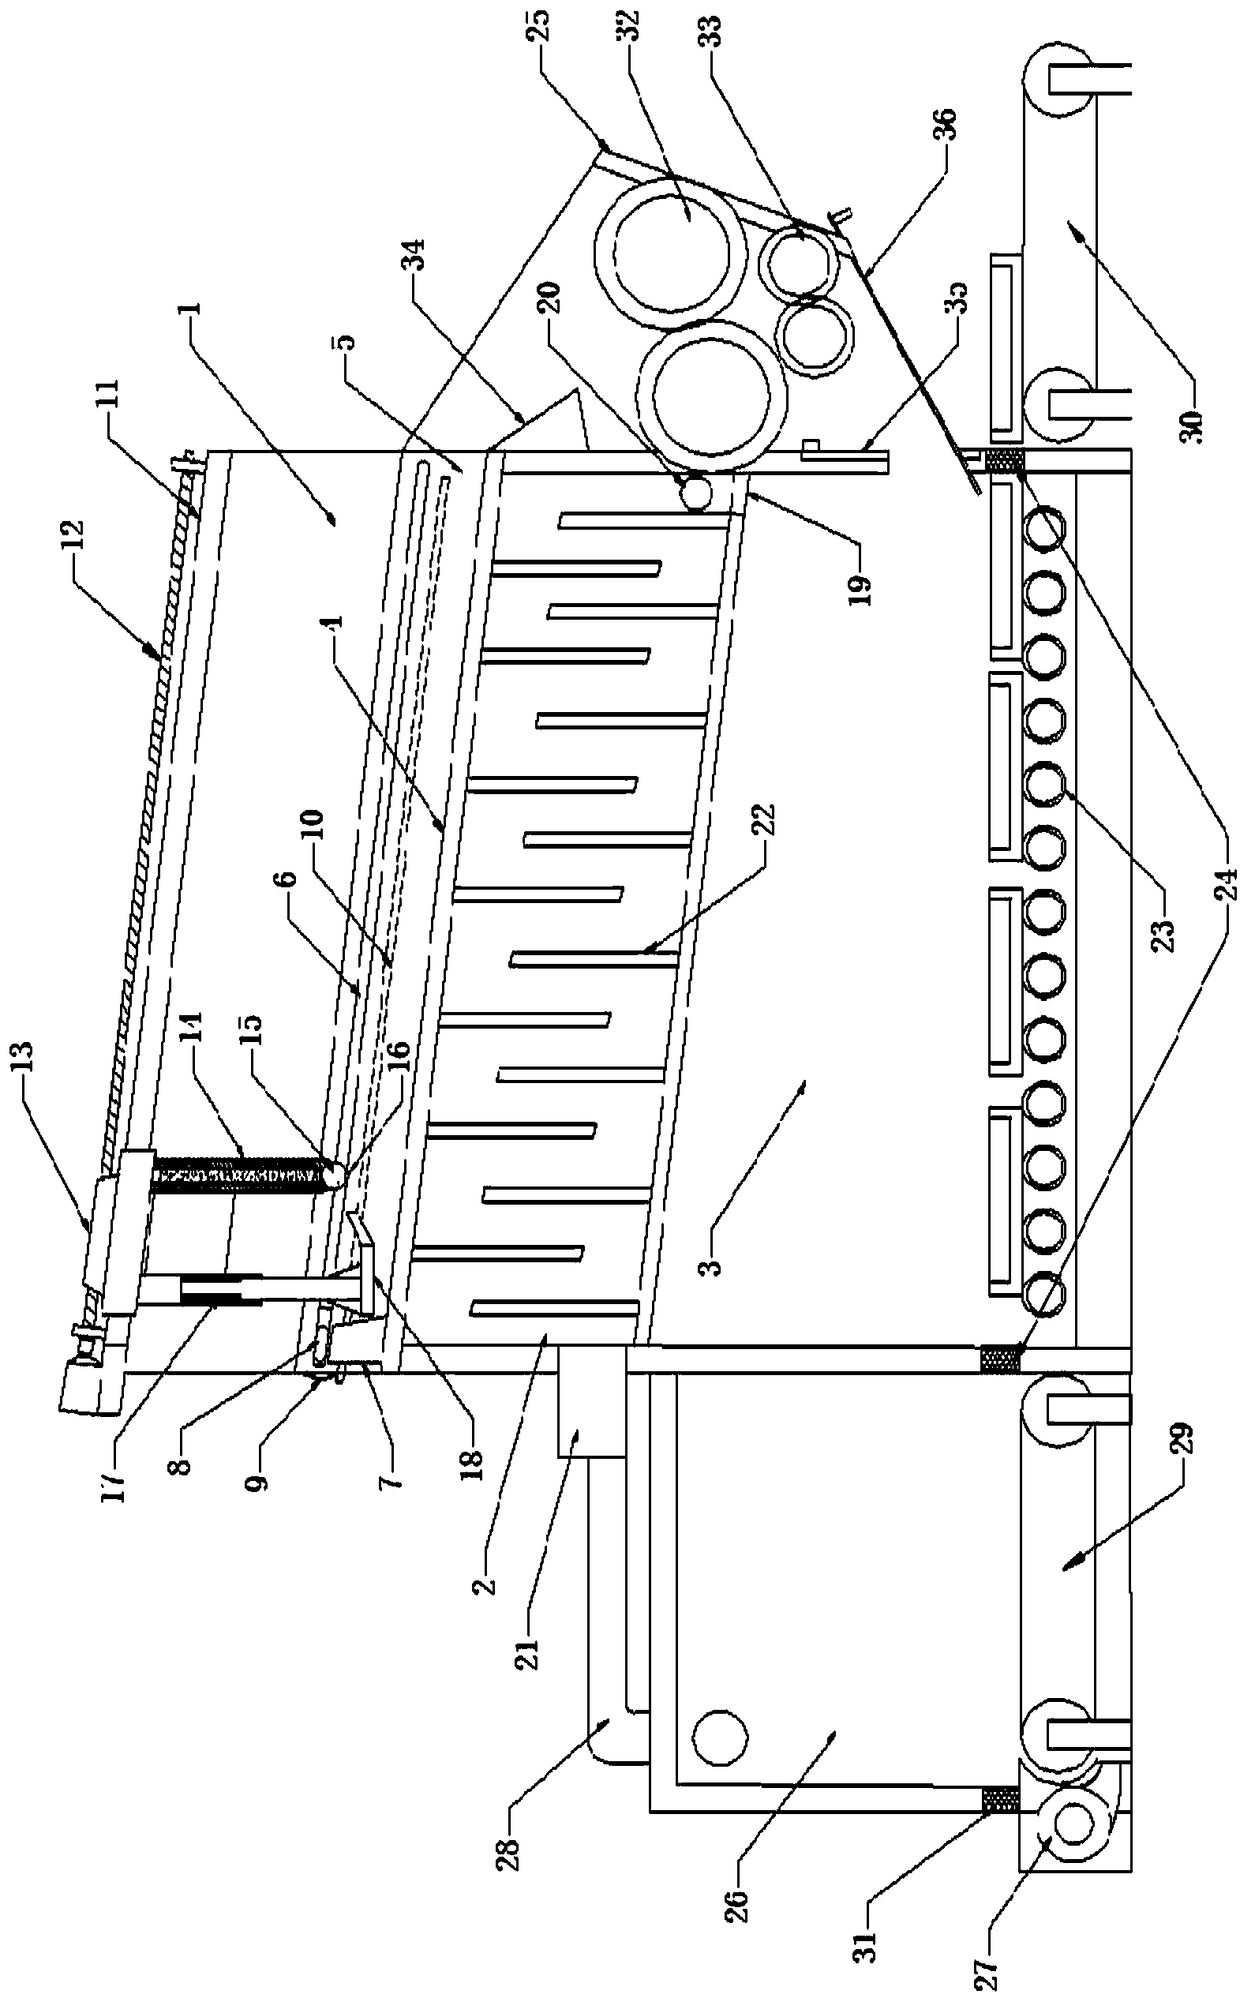 A slurry dry, pulverized and sinter integrated device